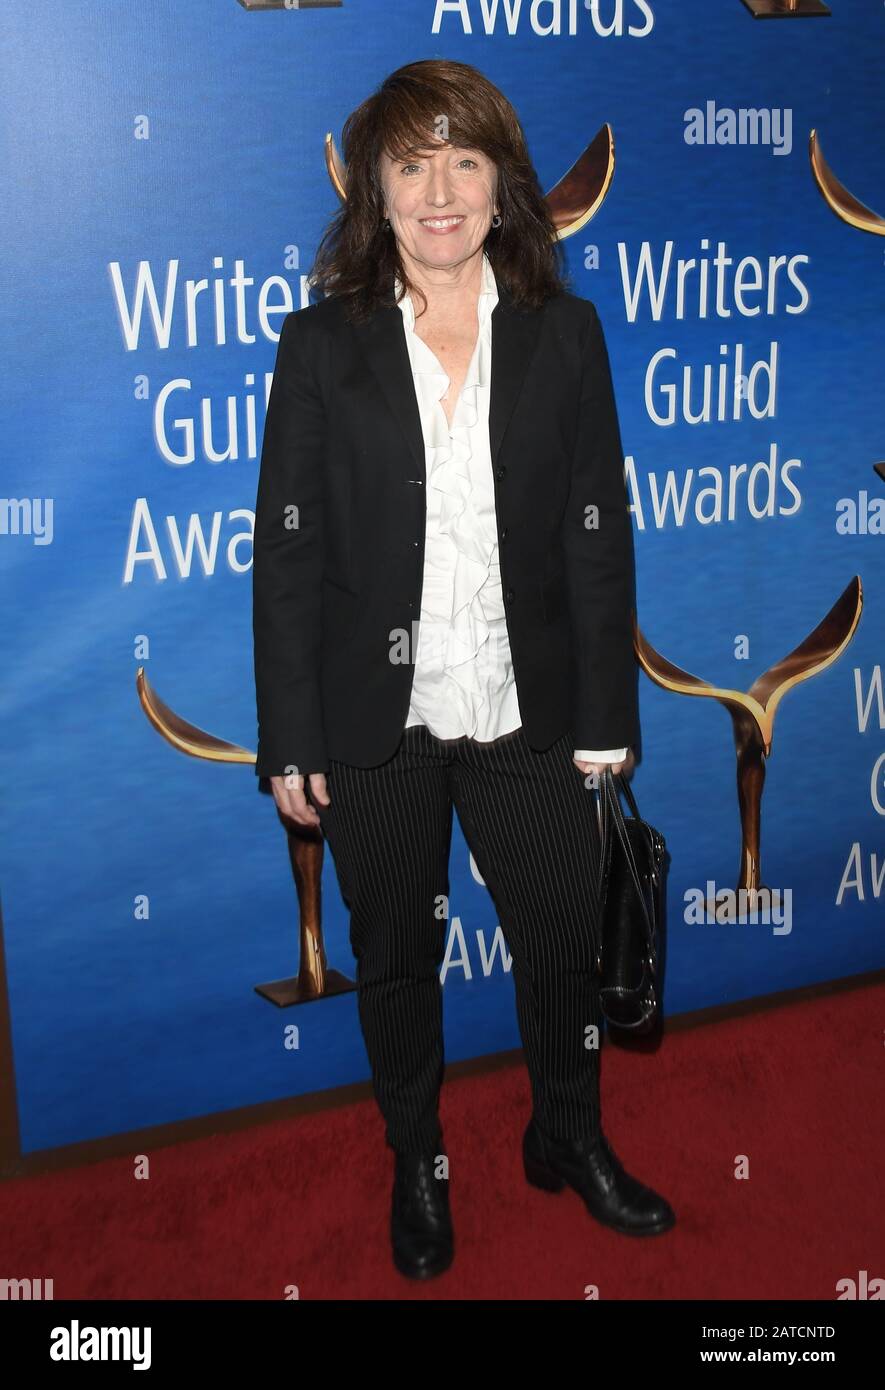 Writers guild awards 2020 hi-res stock photography and images